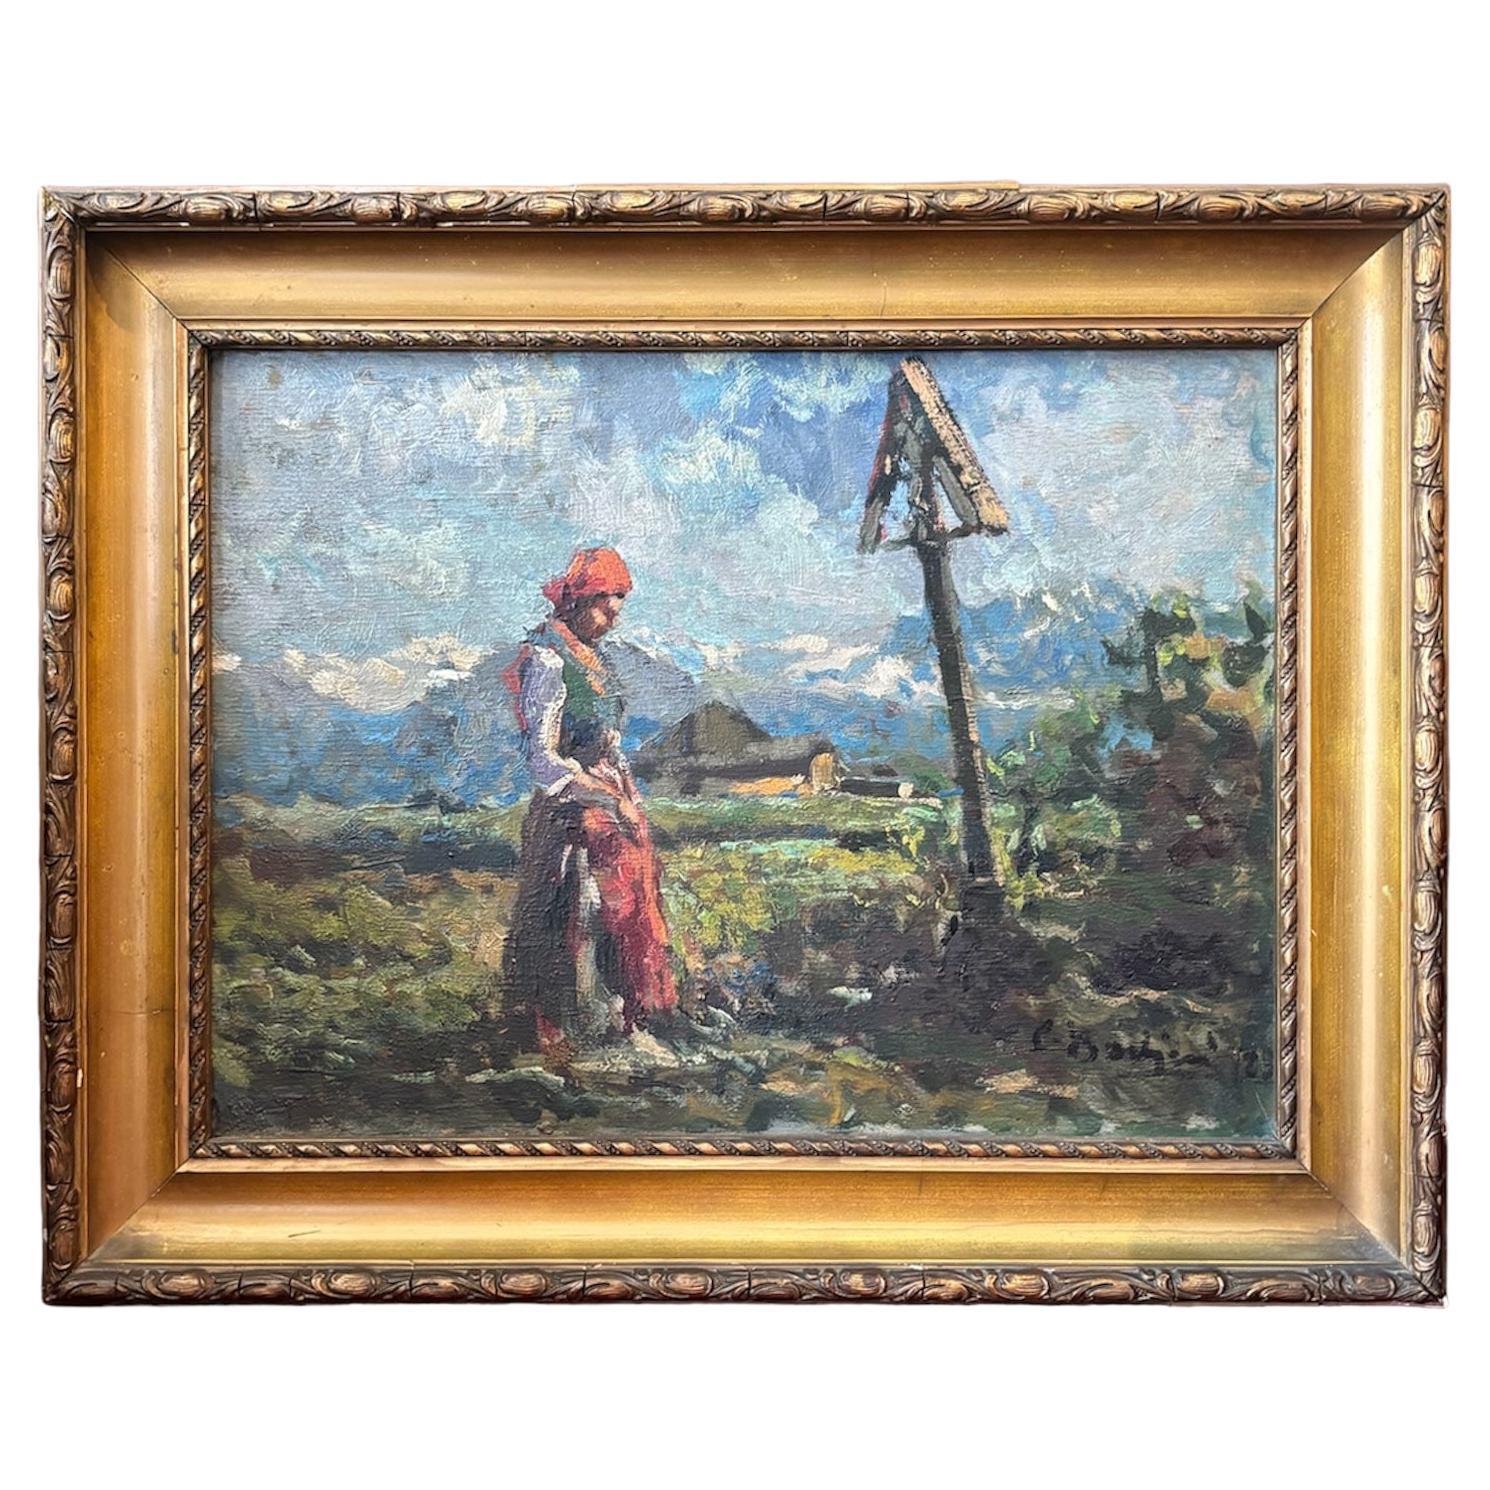 Oil Painting on Canvas of a Rural Landscape by Contardo Barbieri, 1940s